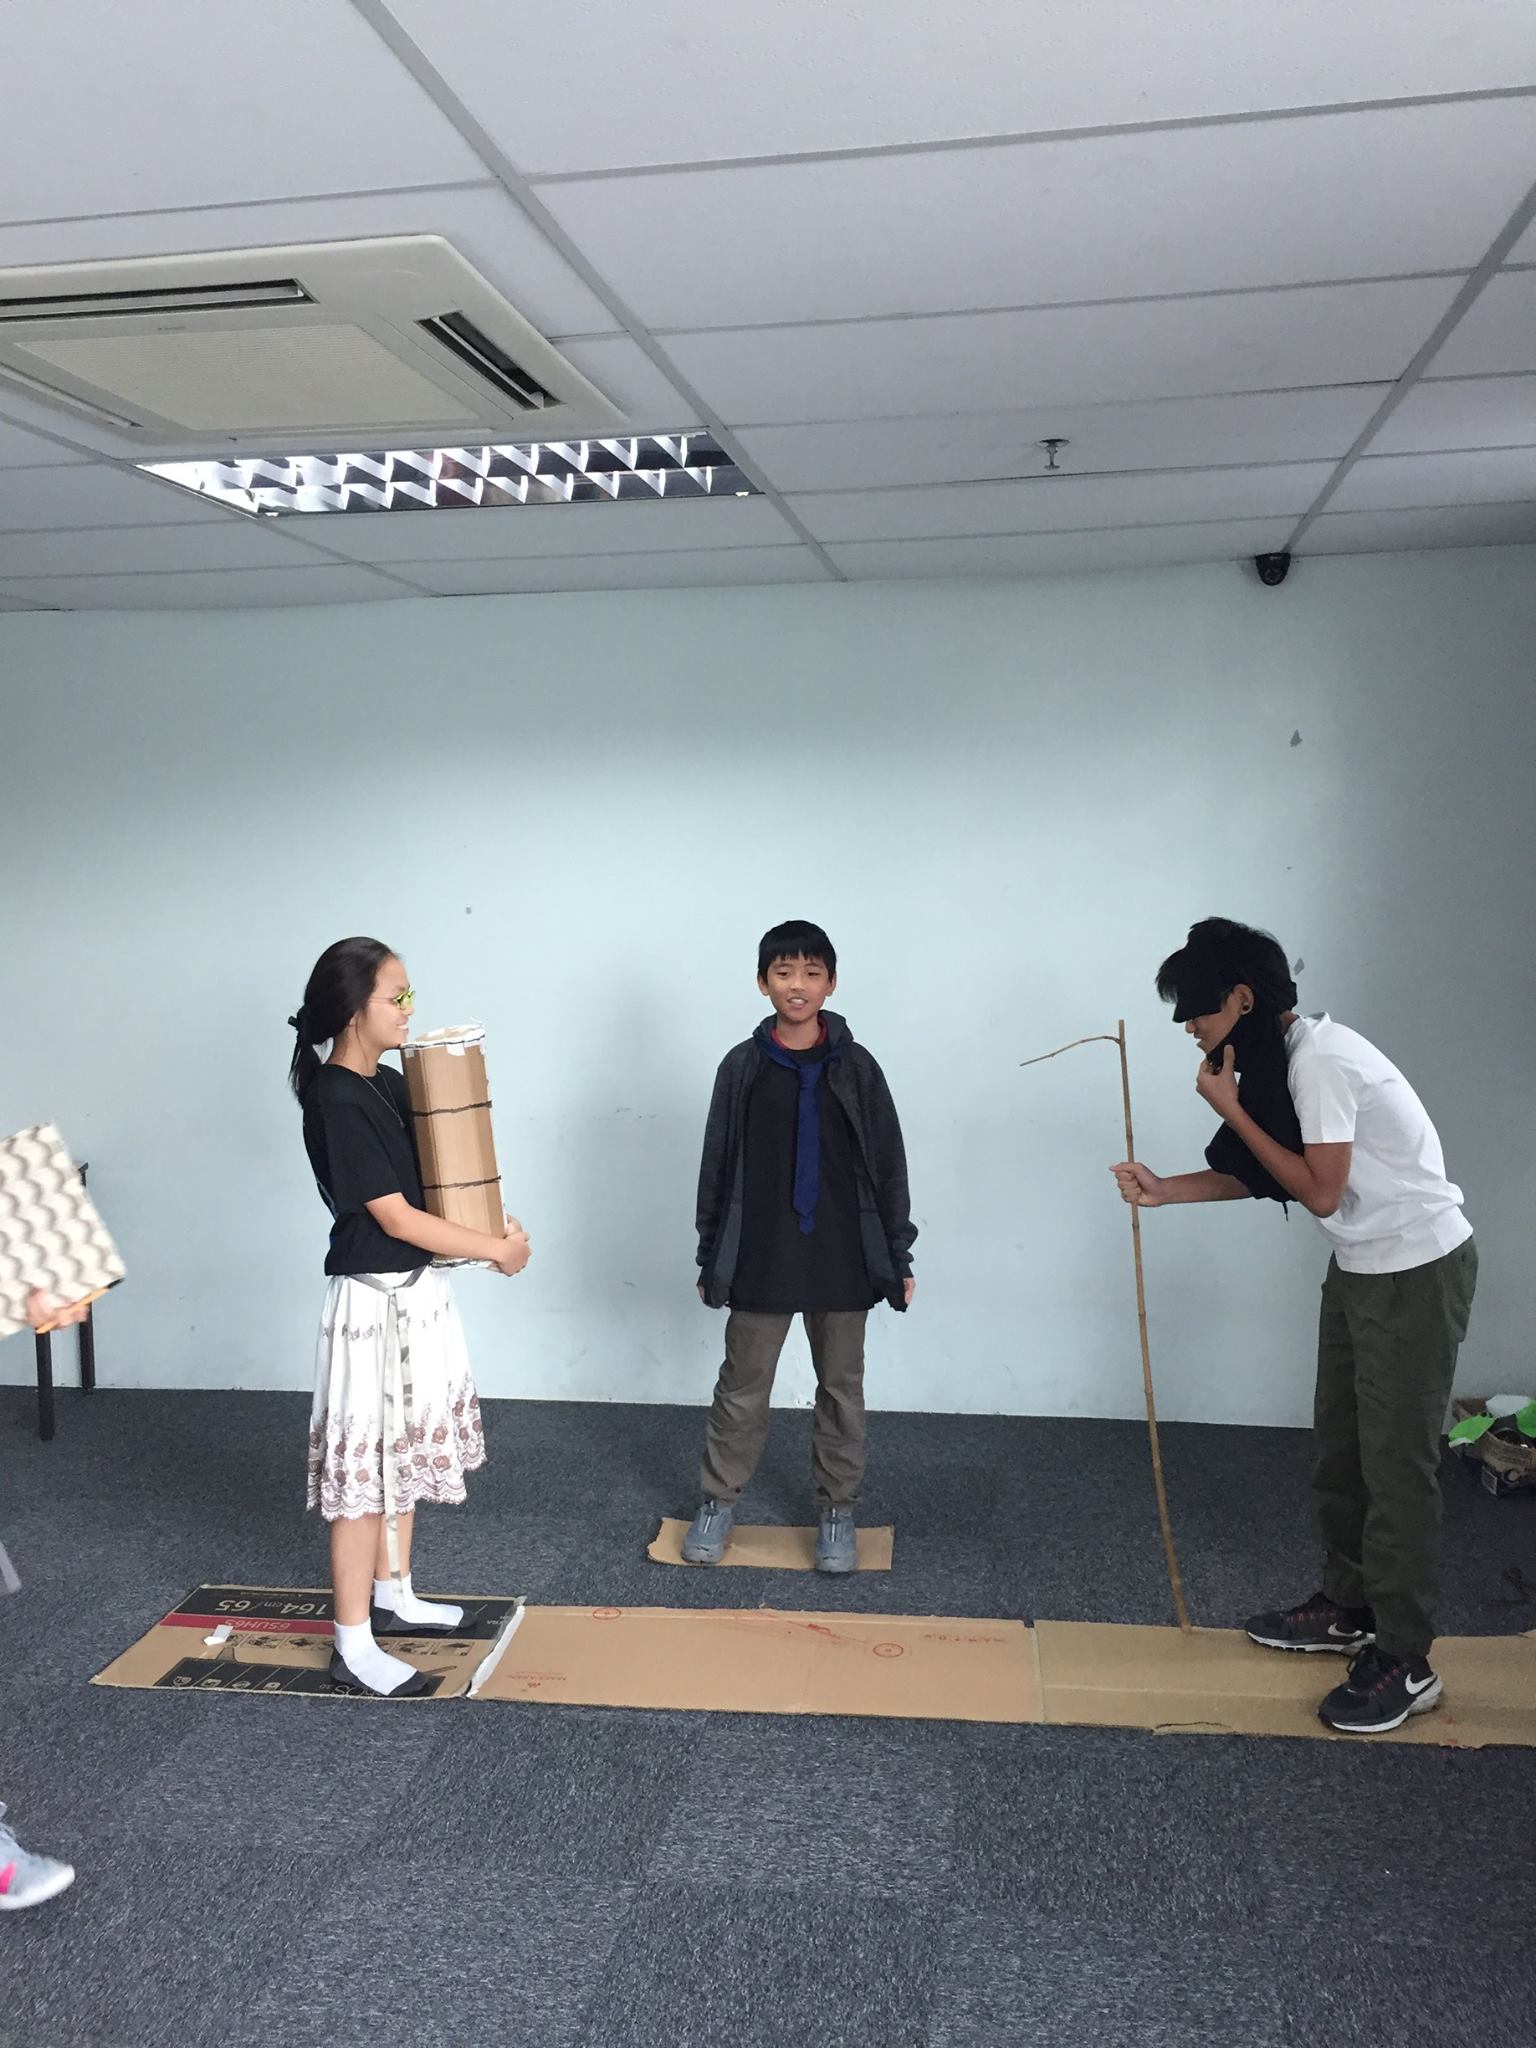 Sri Emas International School students acting out a scene from Robin Hood as part of their coursework for English class.